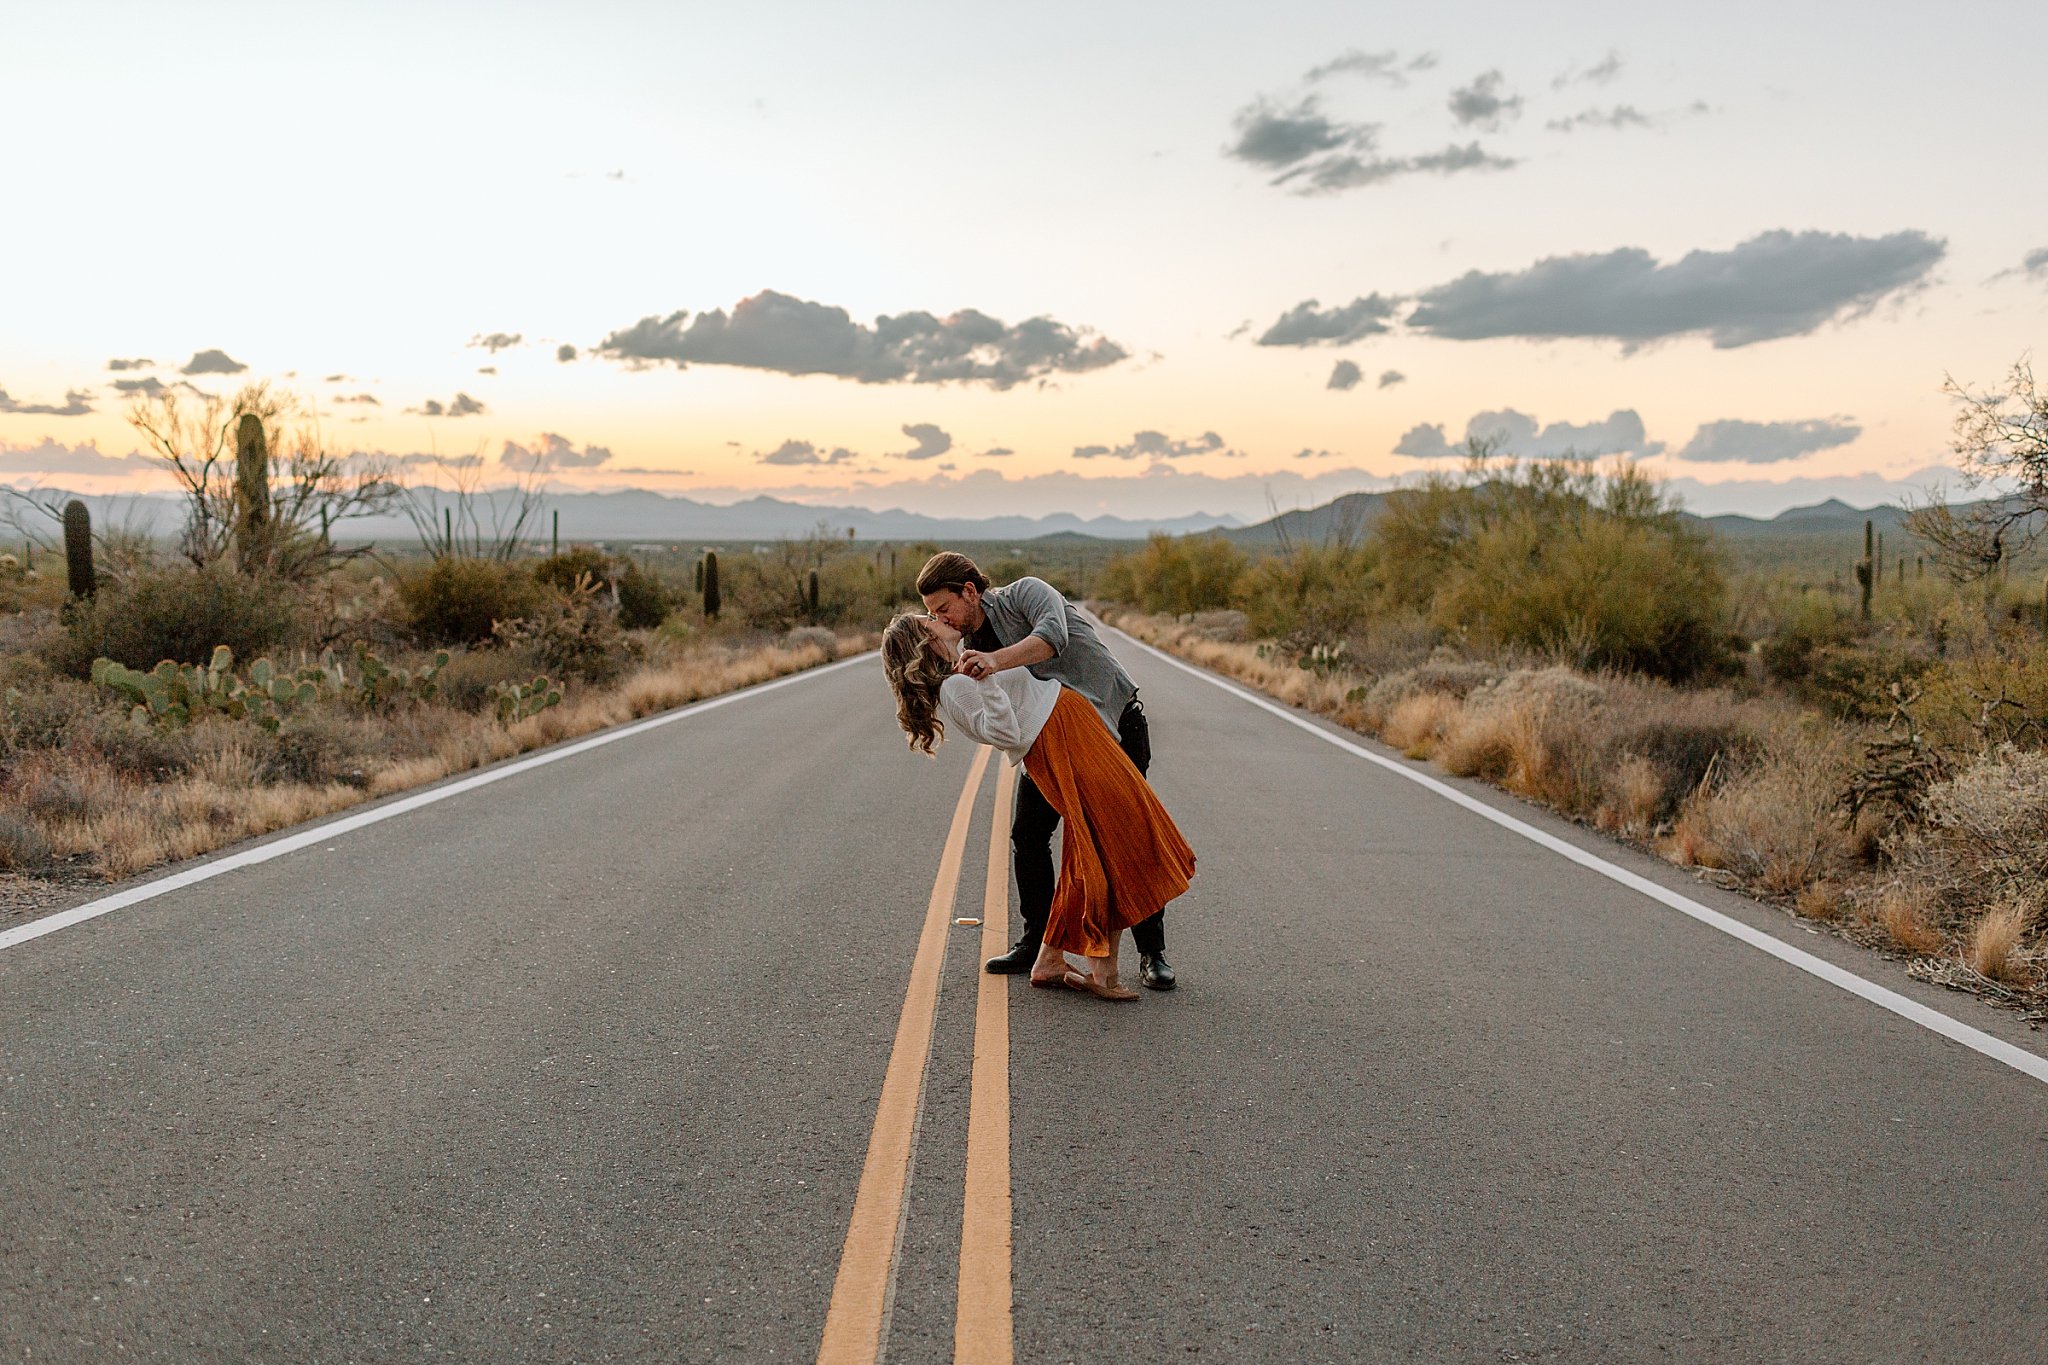  man dips and kisses woman in road by Lucy B Photography 